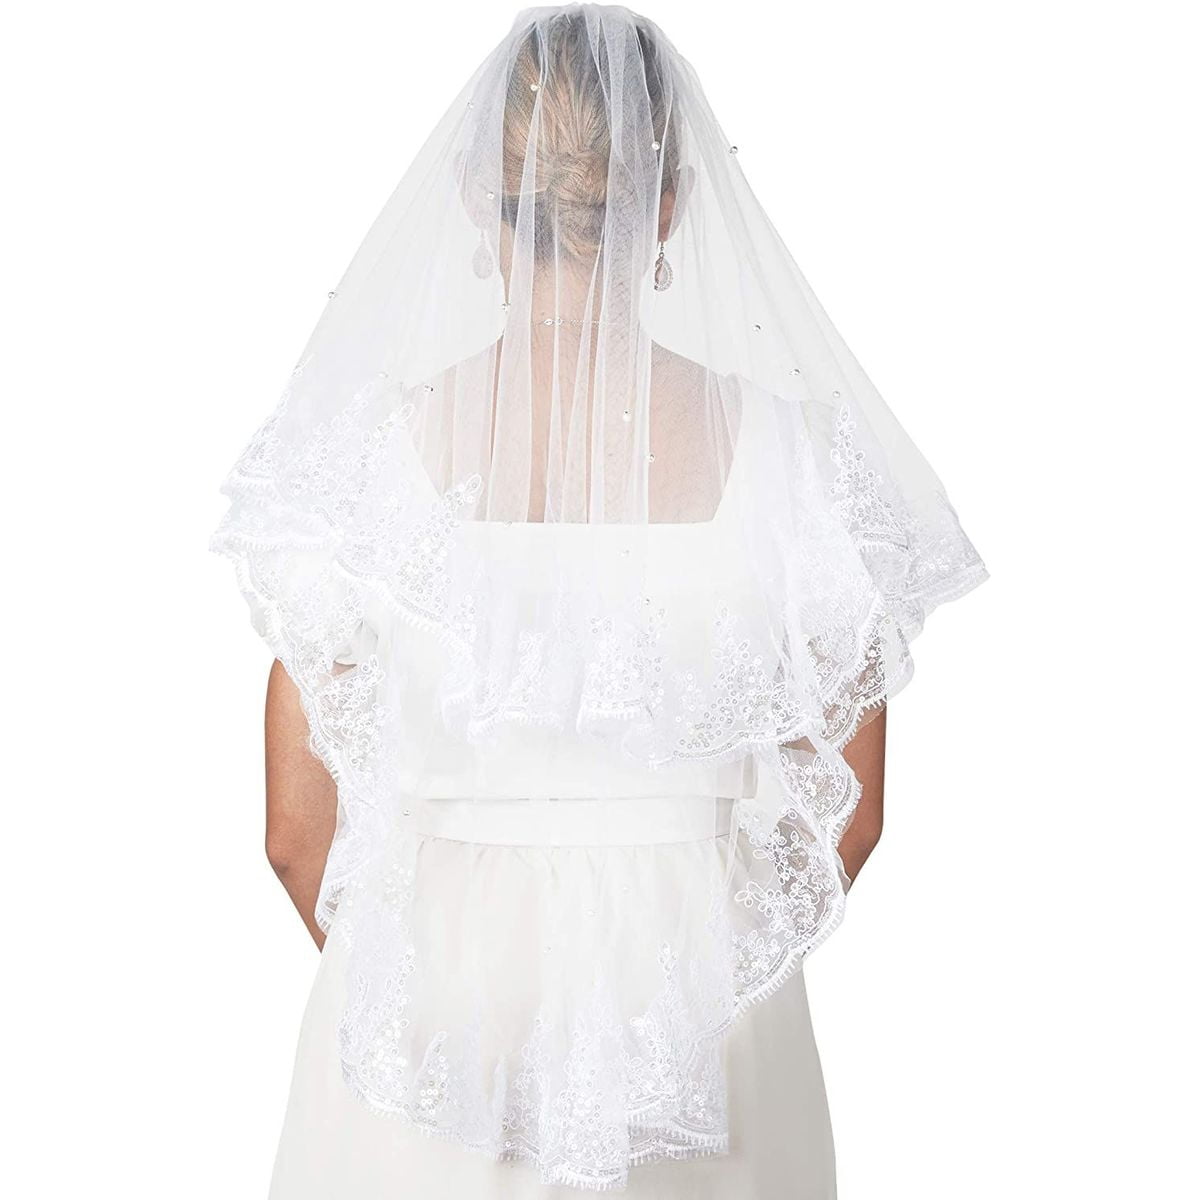 2 Tier Bridal Veil Beautiful Ivory Cathedral Short Wedding Veils Comb Lace Edge 